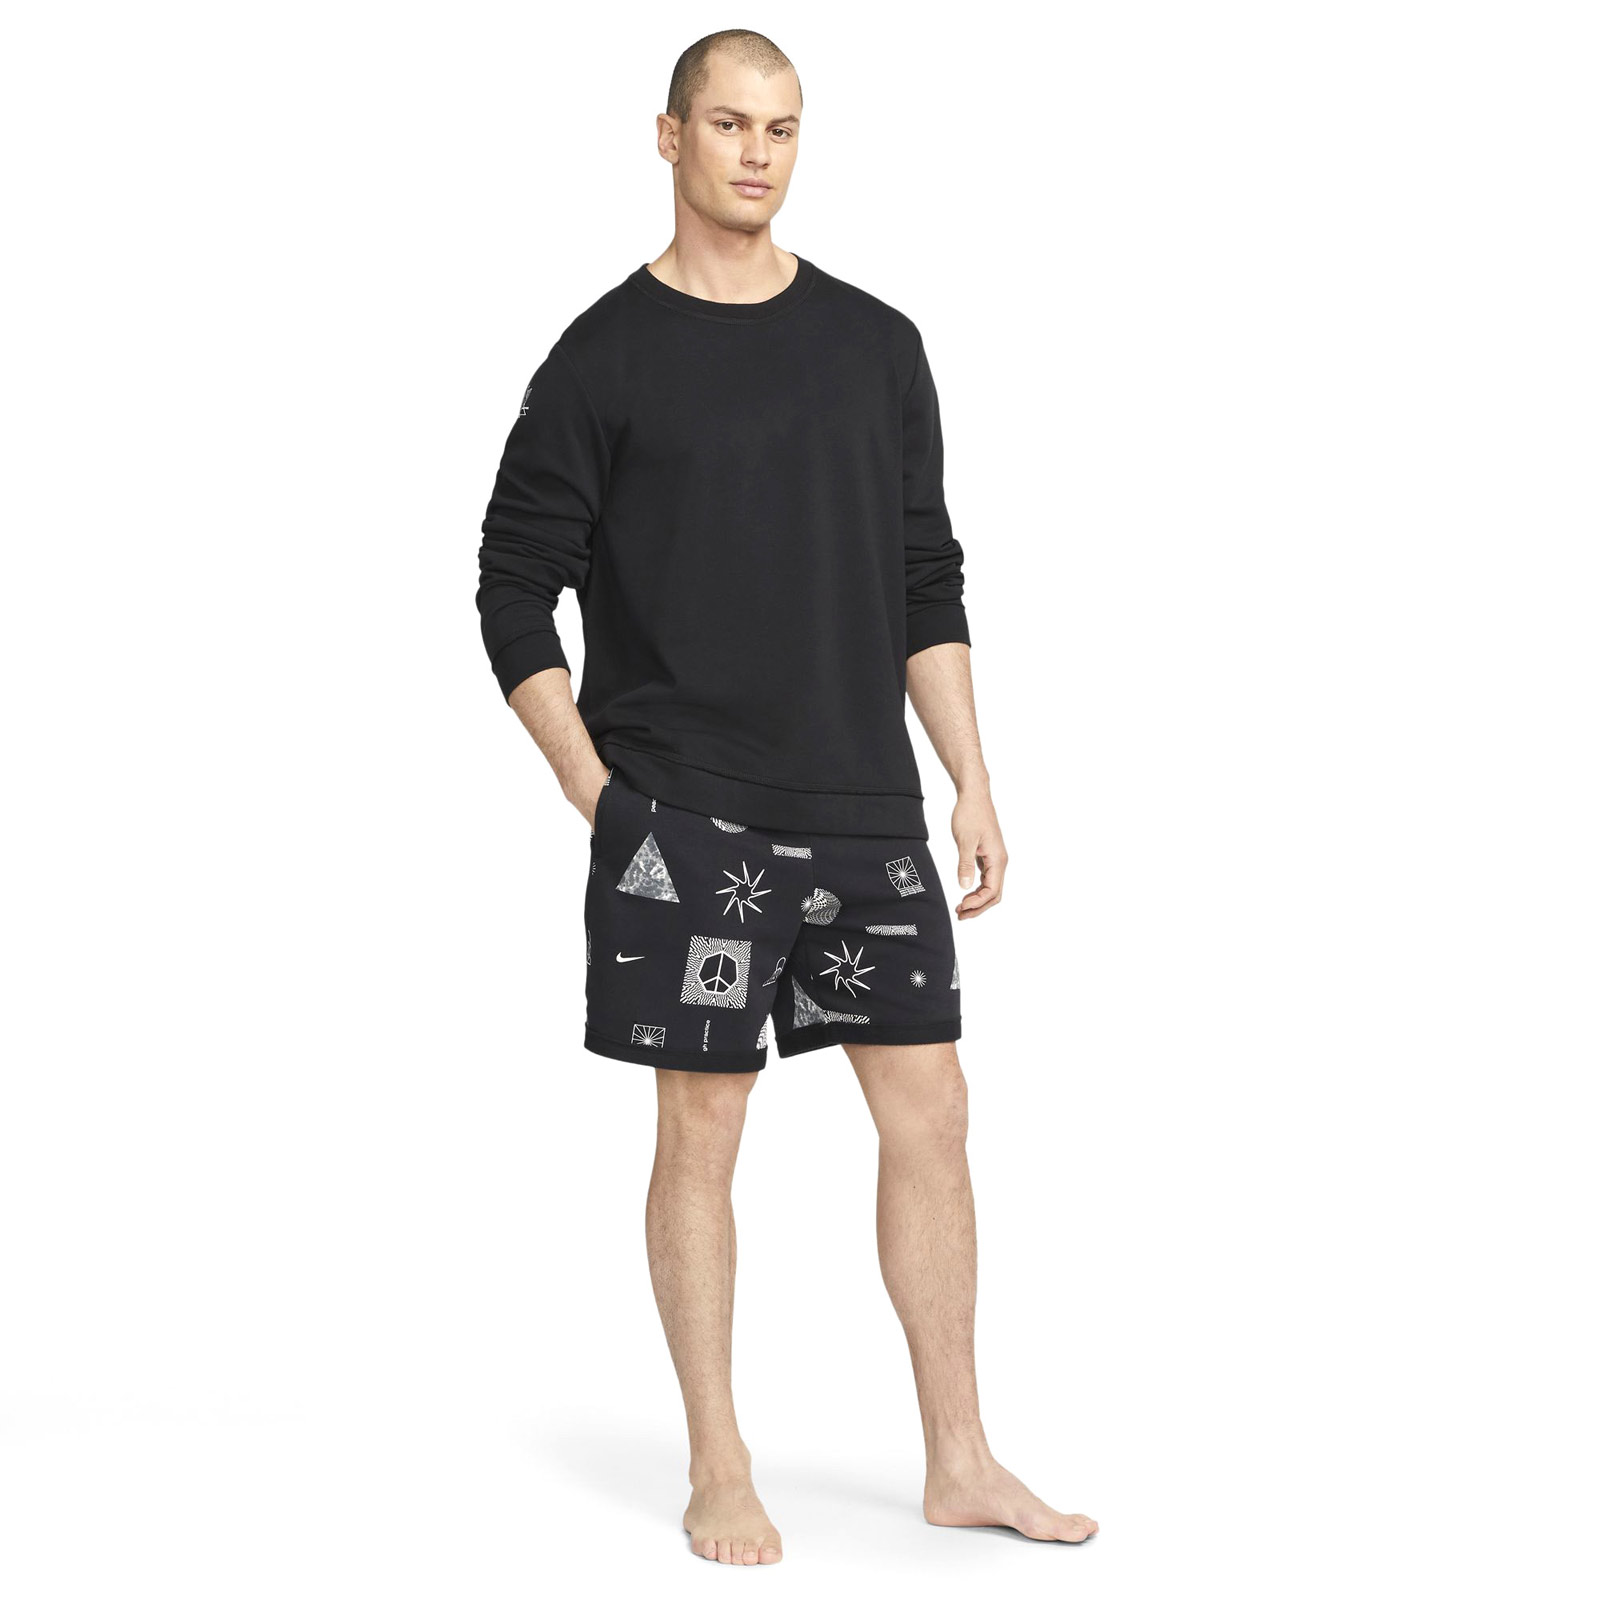 NIKE YOGA THERMA-FIT MENS GRAPHIC FLEECE SHORTS